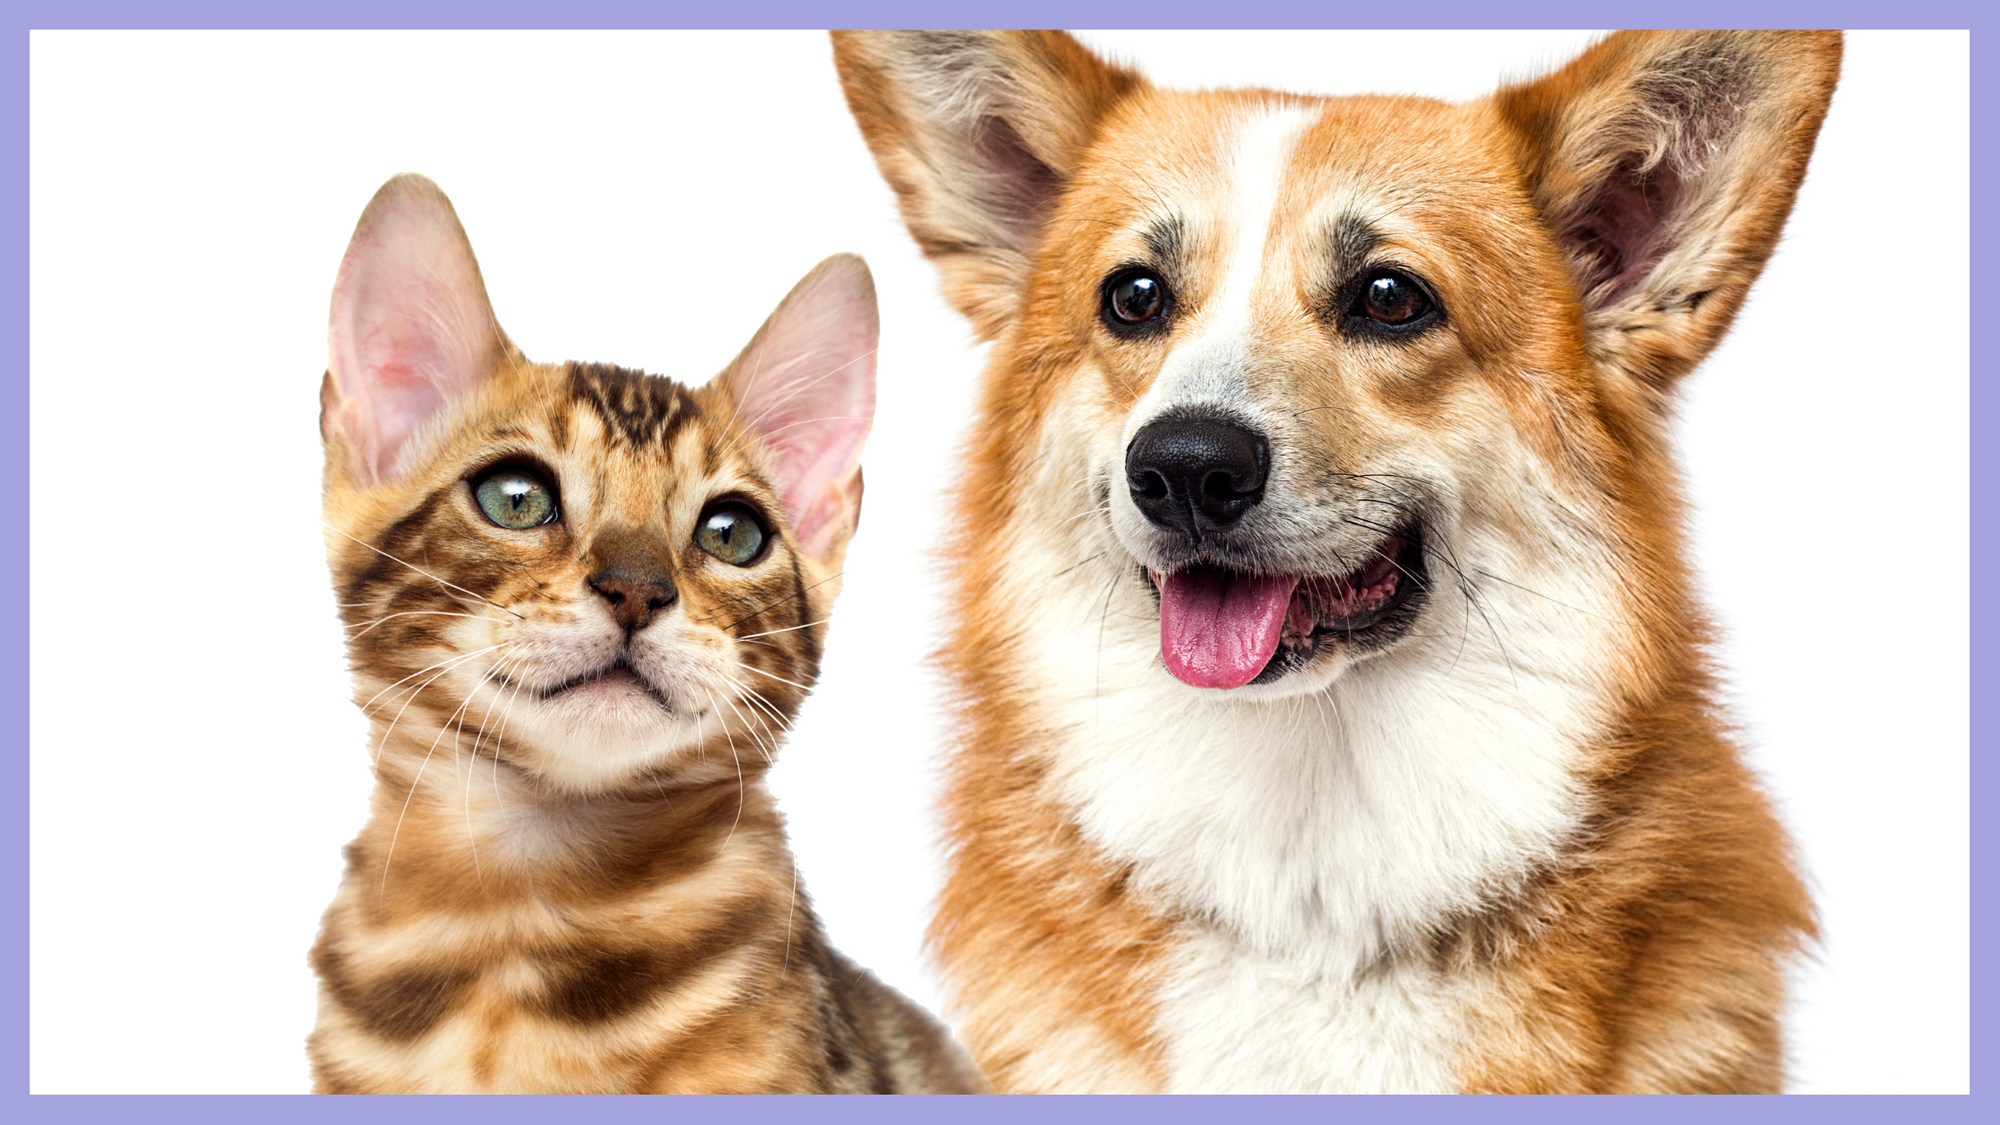 Canine and Feline Body Language: Common Misconceptions